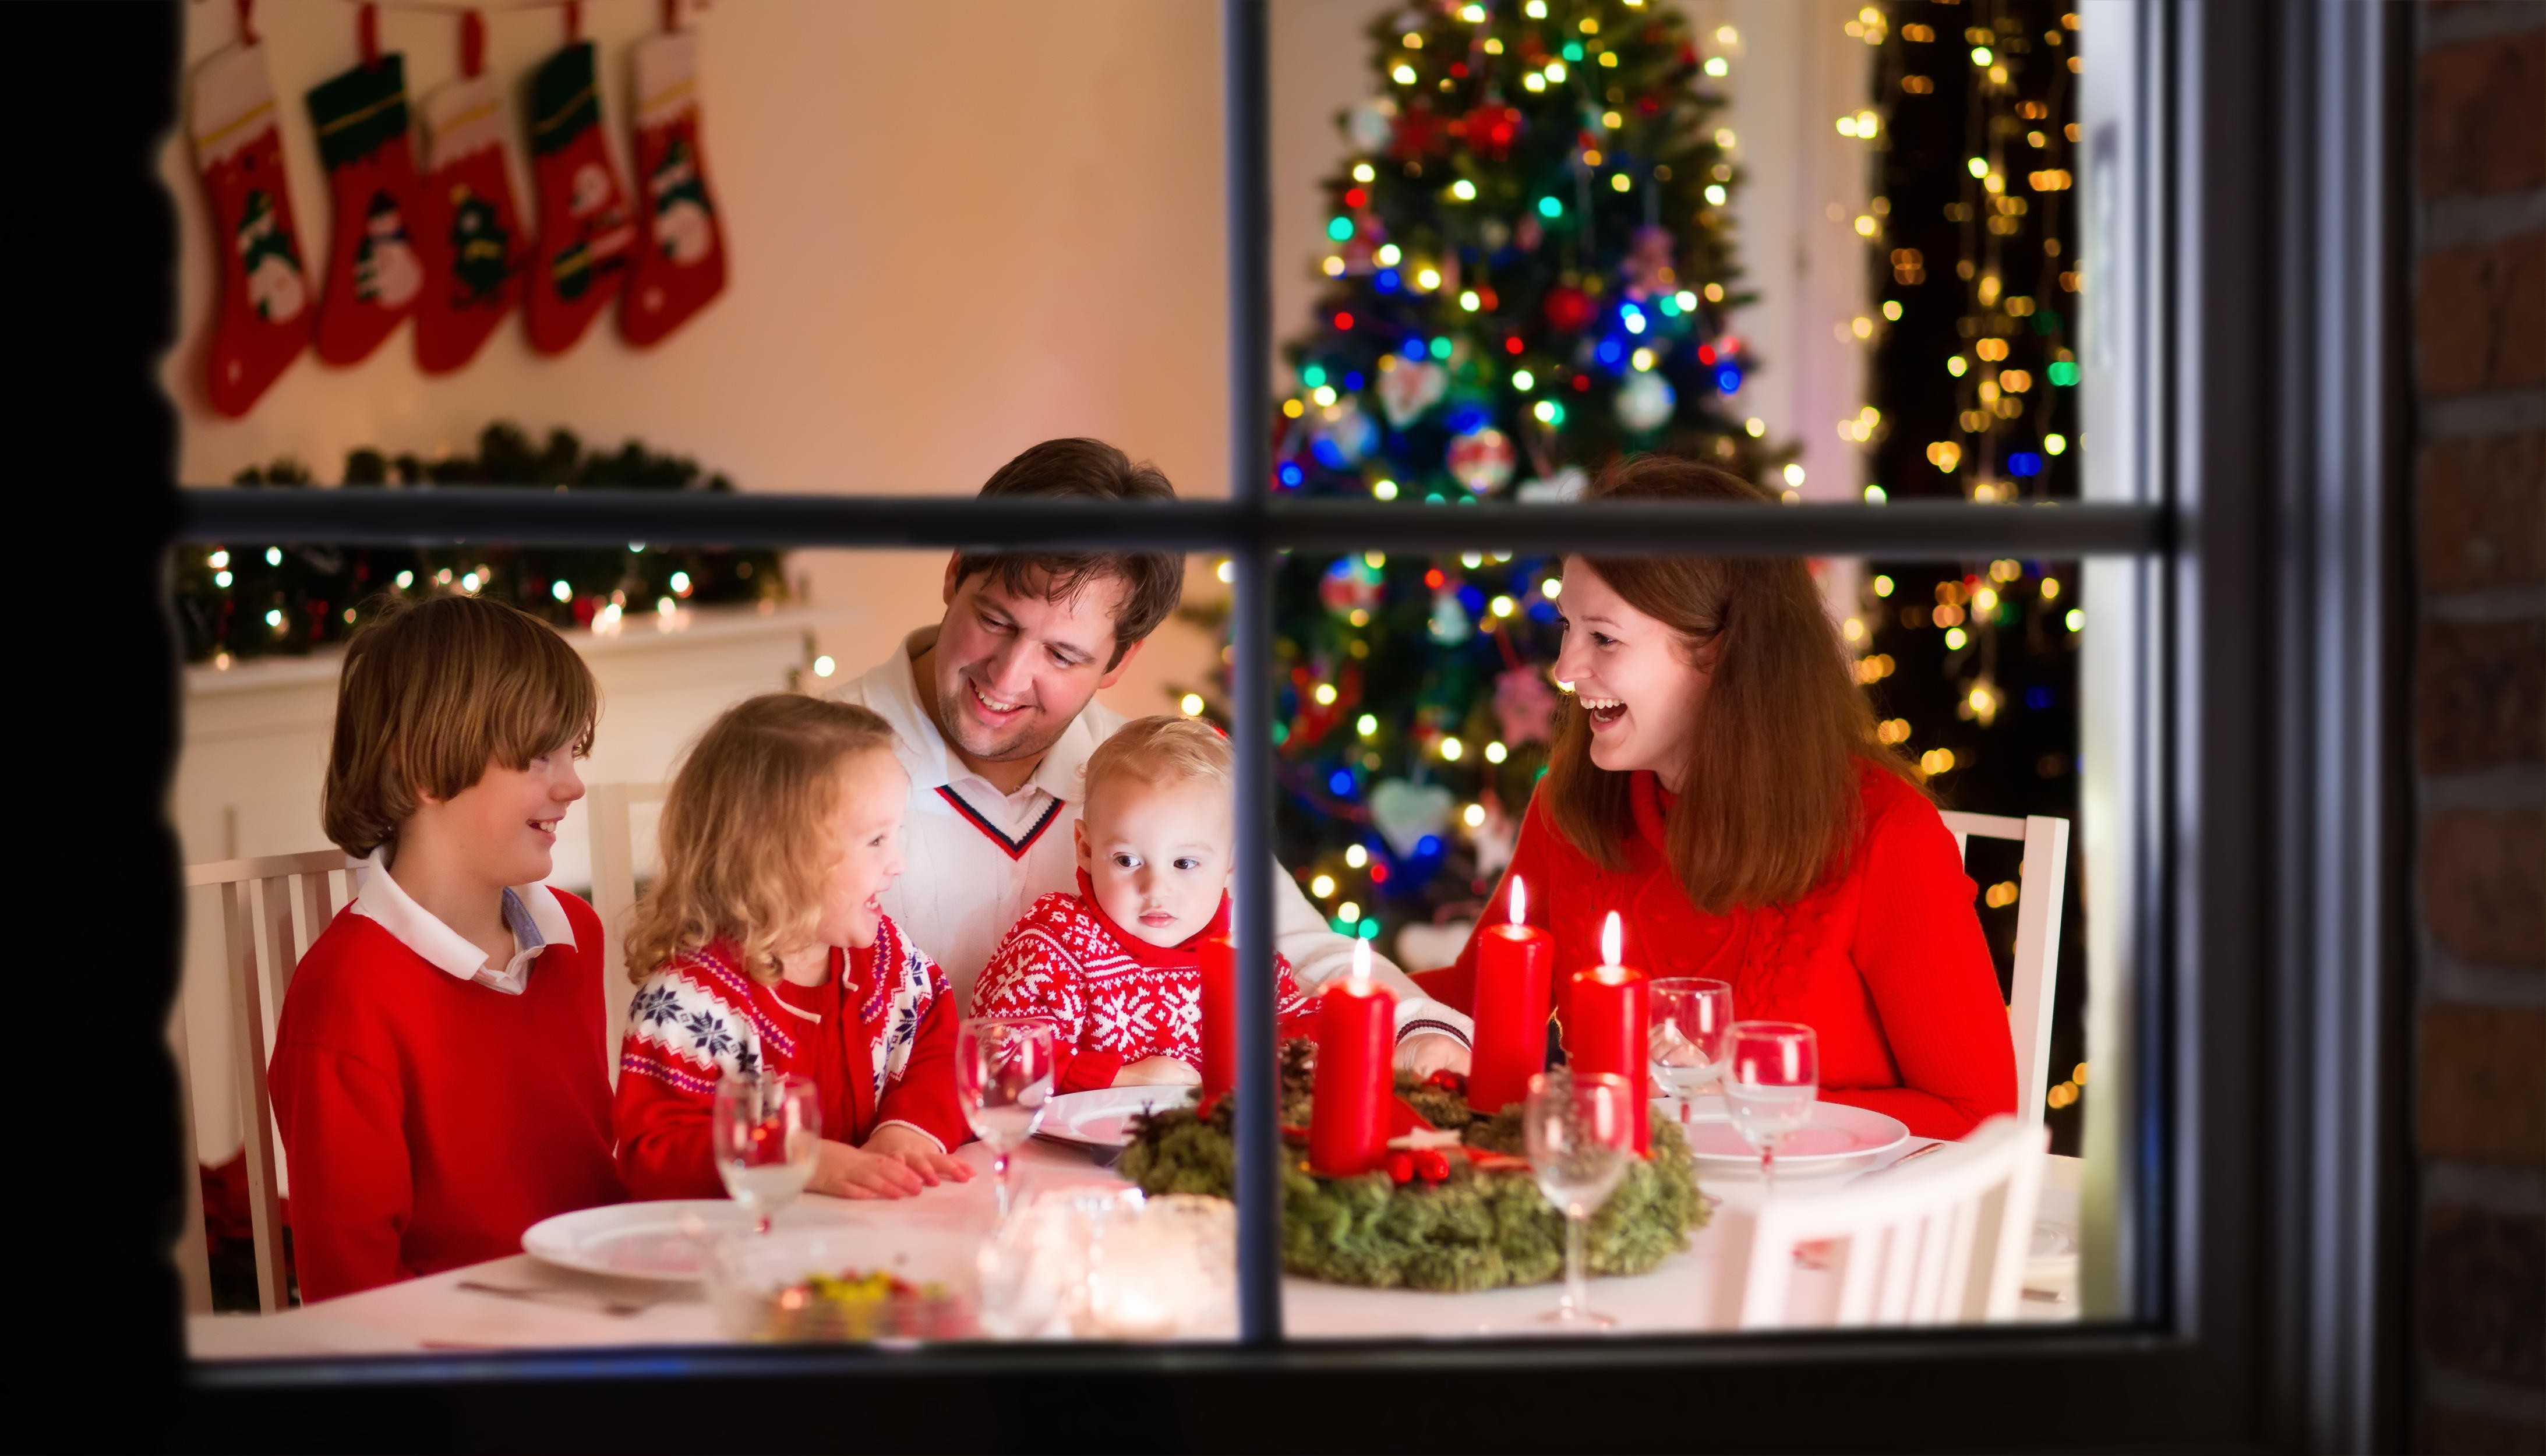 Stock photo of a family with three children celebrating Christmas at home. Photo: Alamy